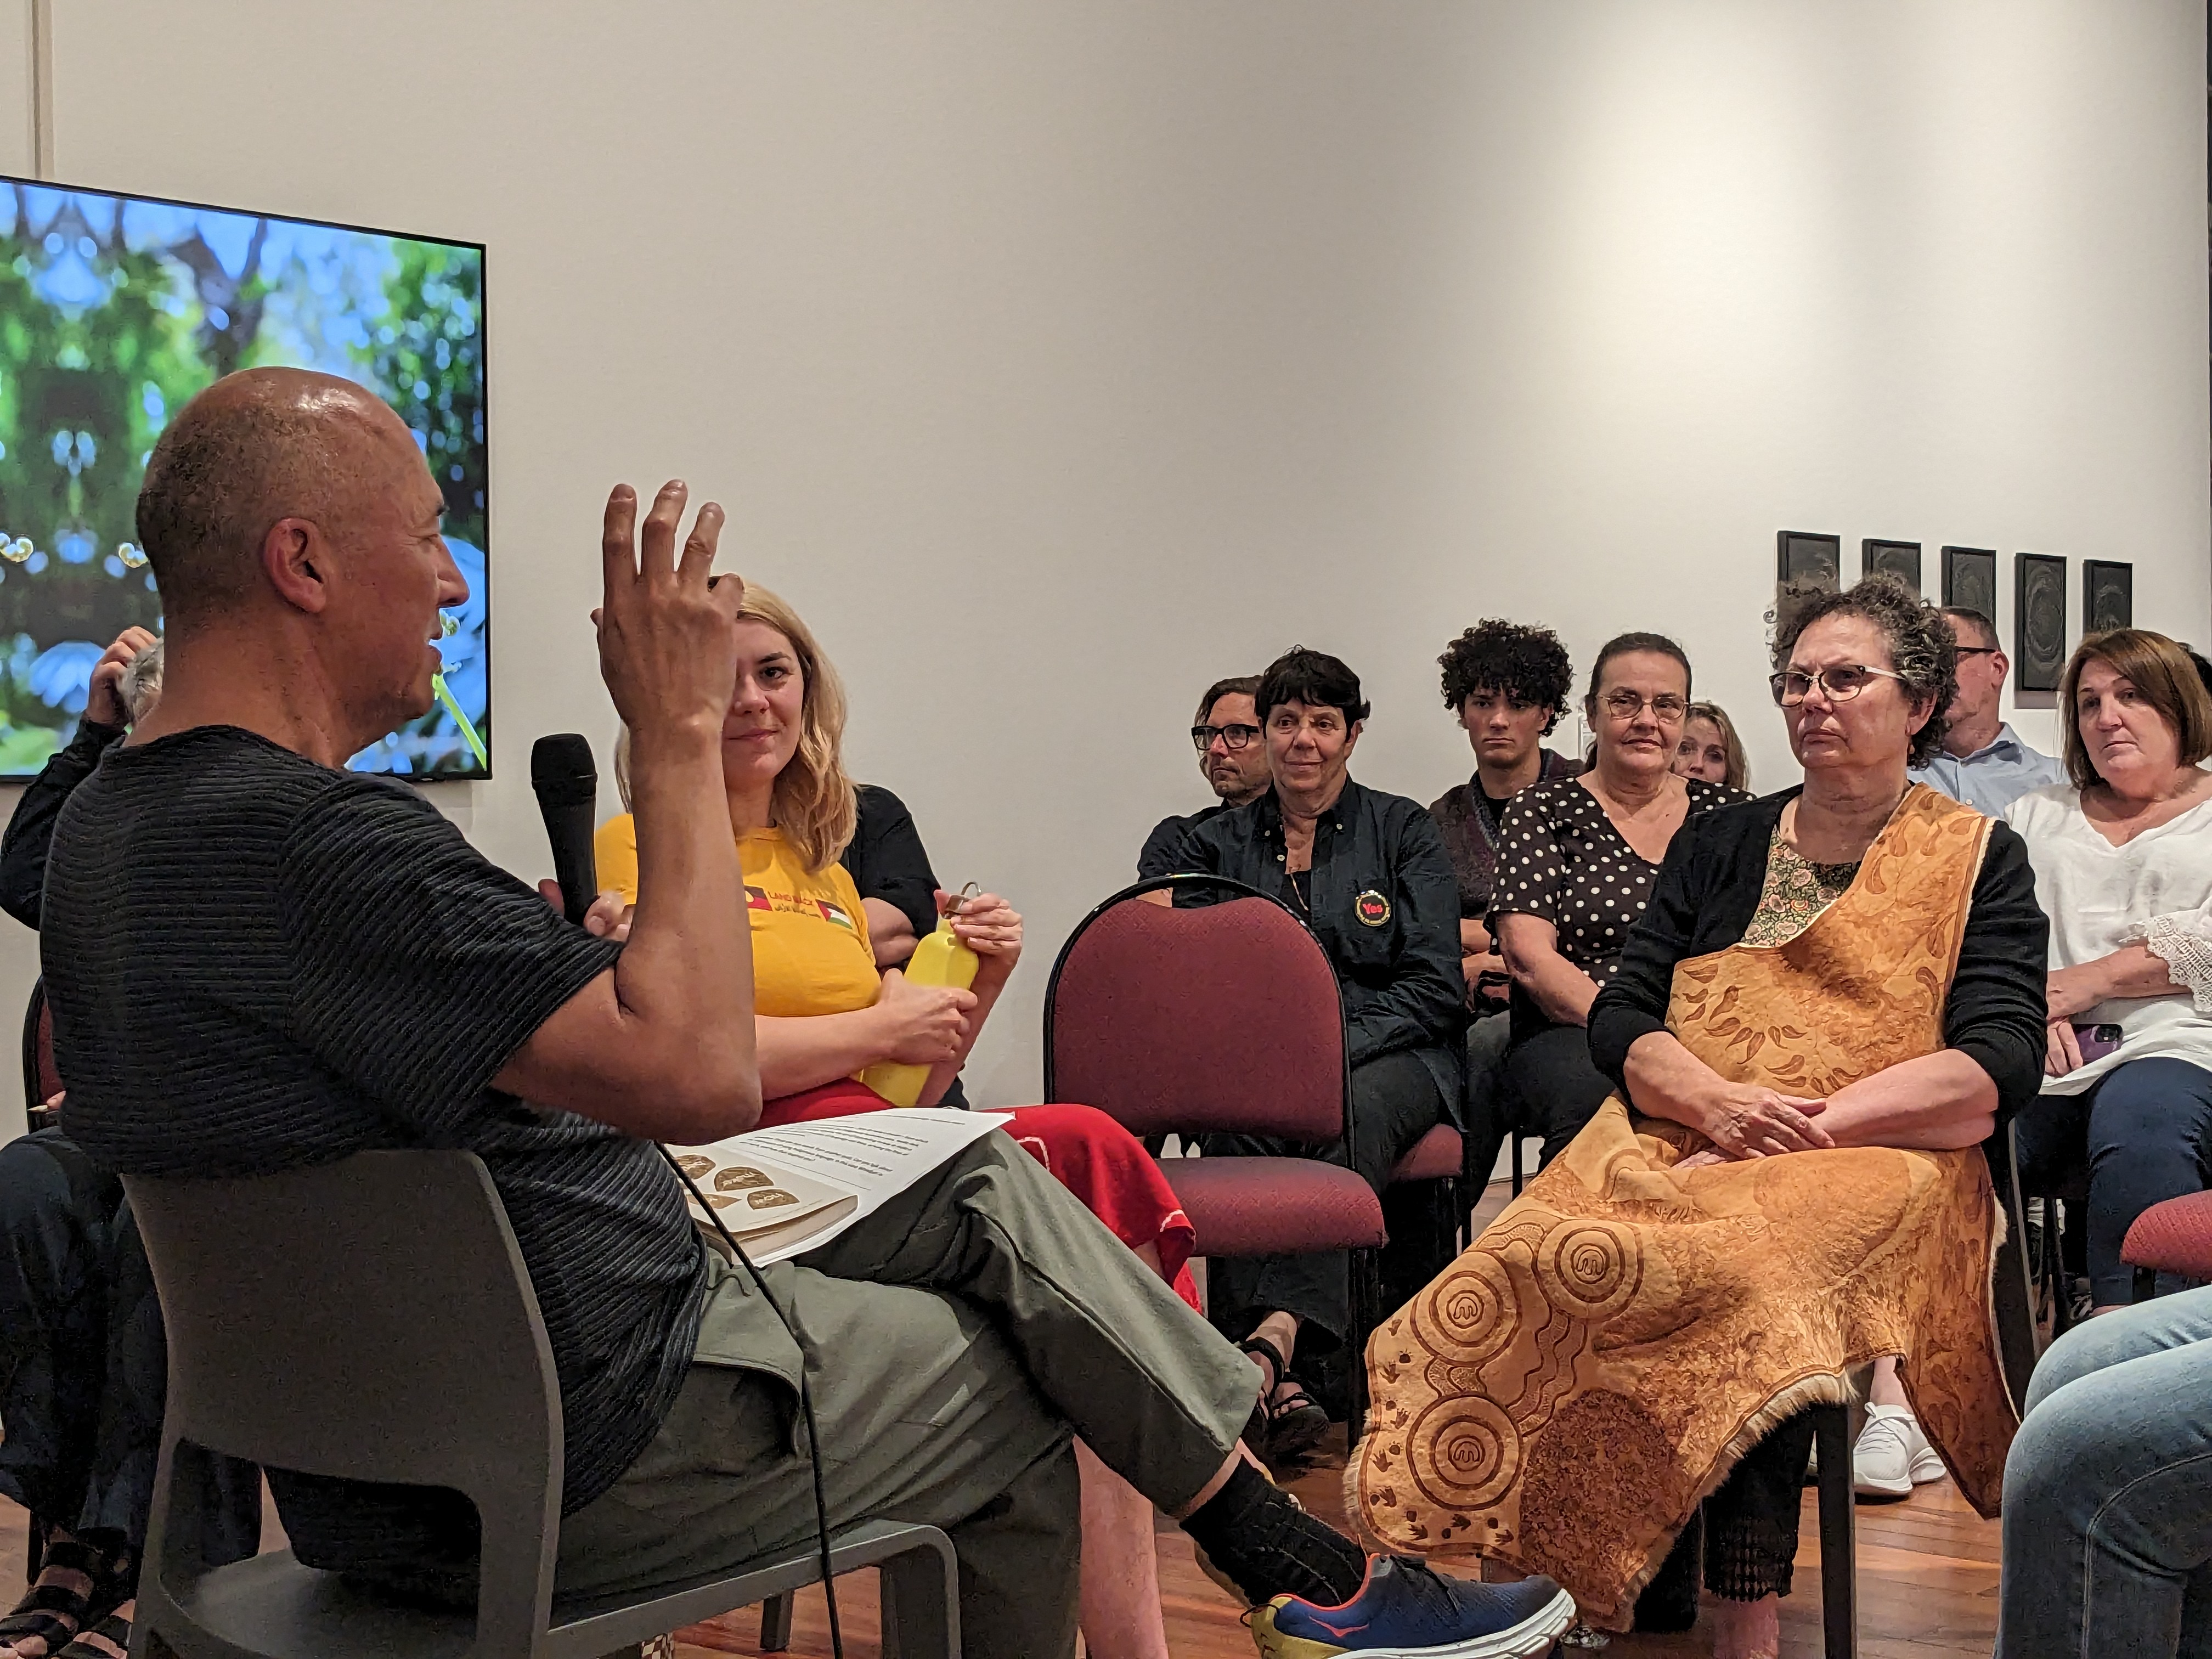 Gerald McMaster speaking during the panel conversation "Indigenous Visual Knowledge and Country"